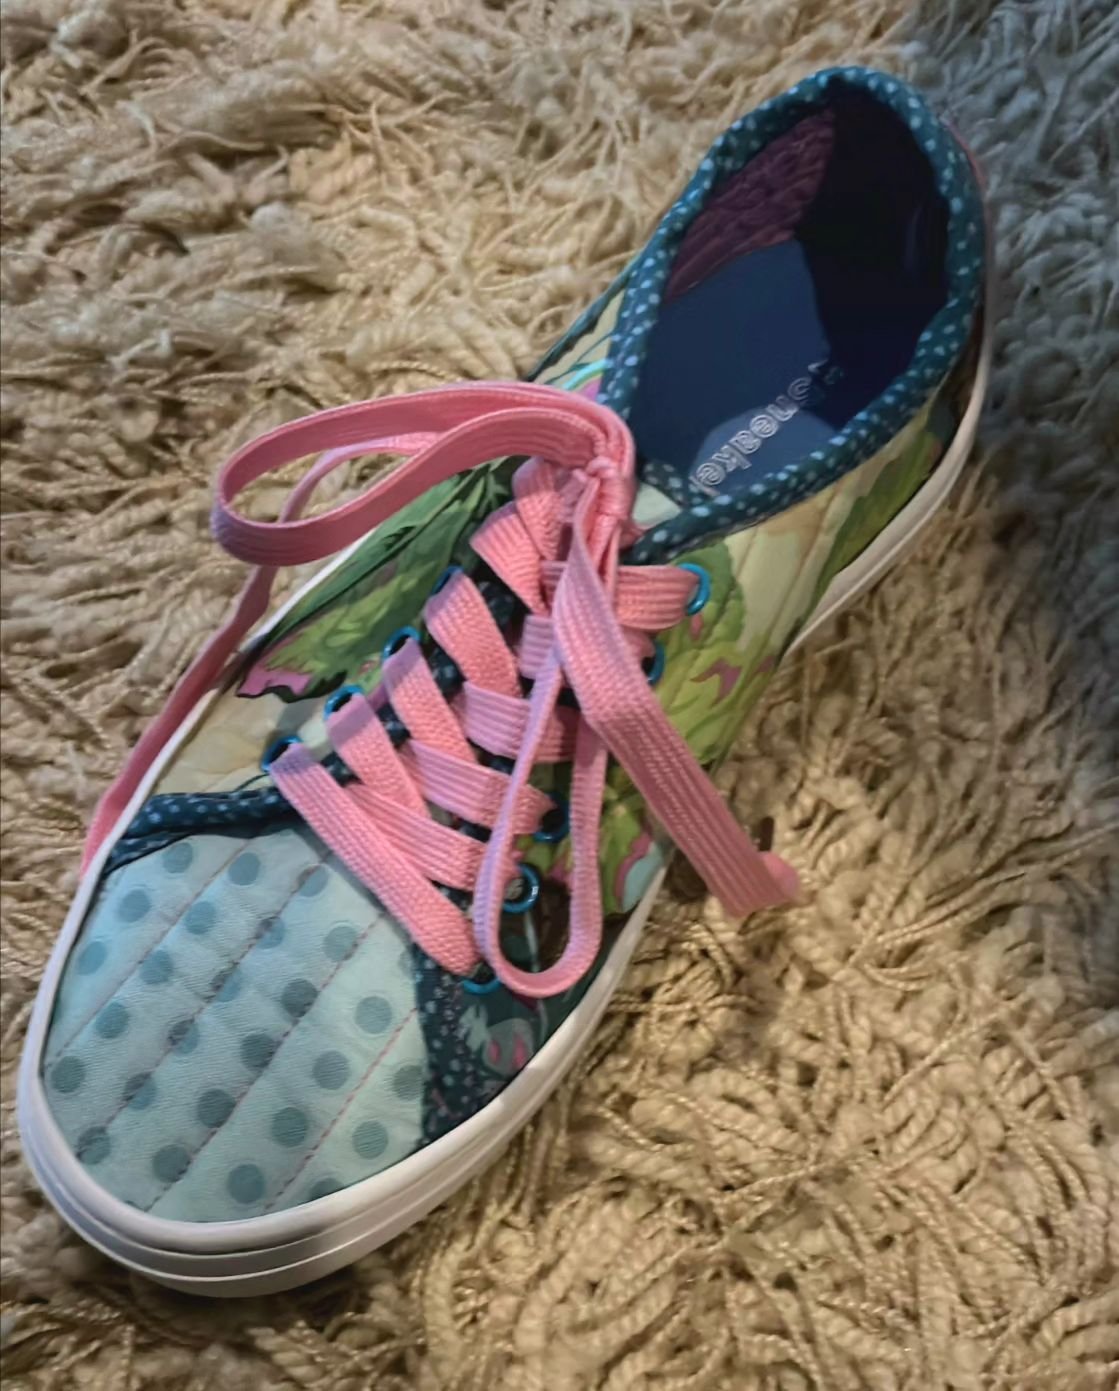 Our students bring their best! These sneakers from pur class in Chicago are the irresistible result of creativity + technical excellence + solid color sense + JOY! 
YOU can do this. We'll show you how. Stop by and see us this weekend at the Genessee 